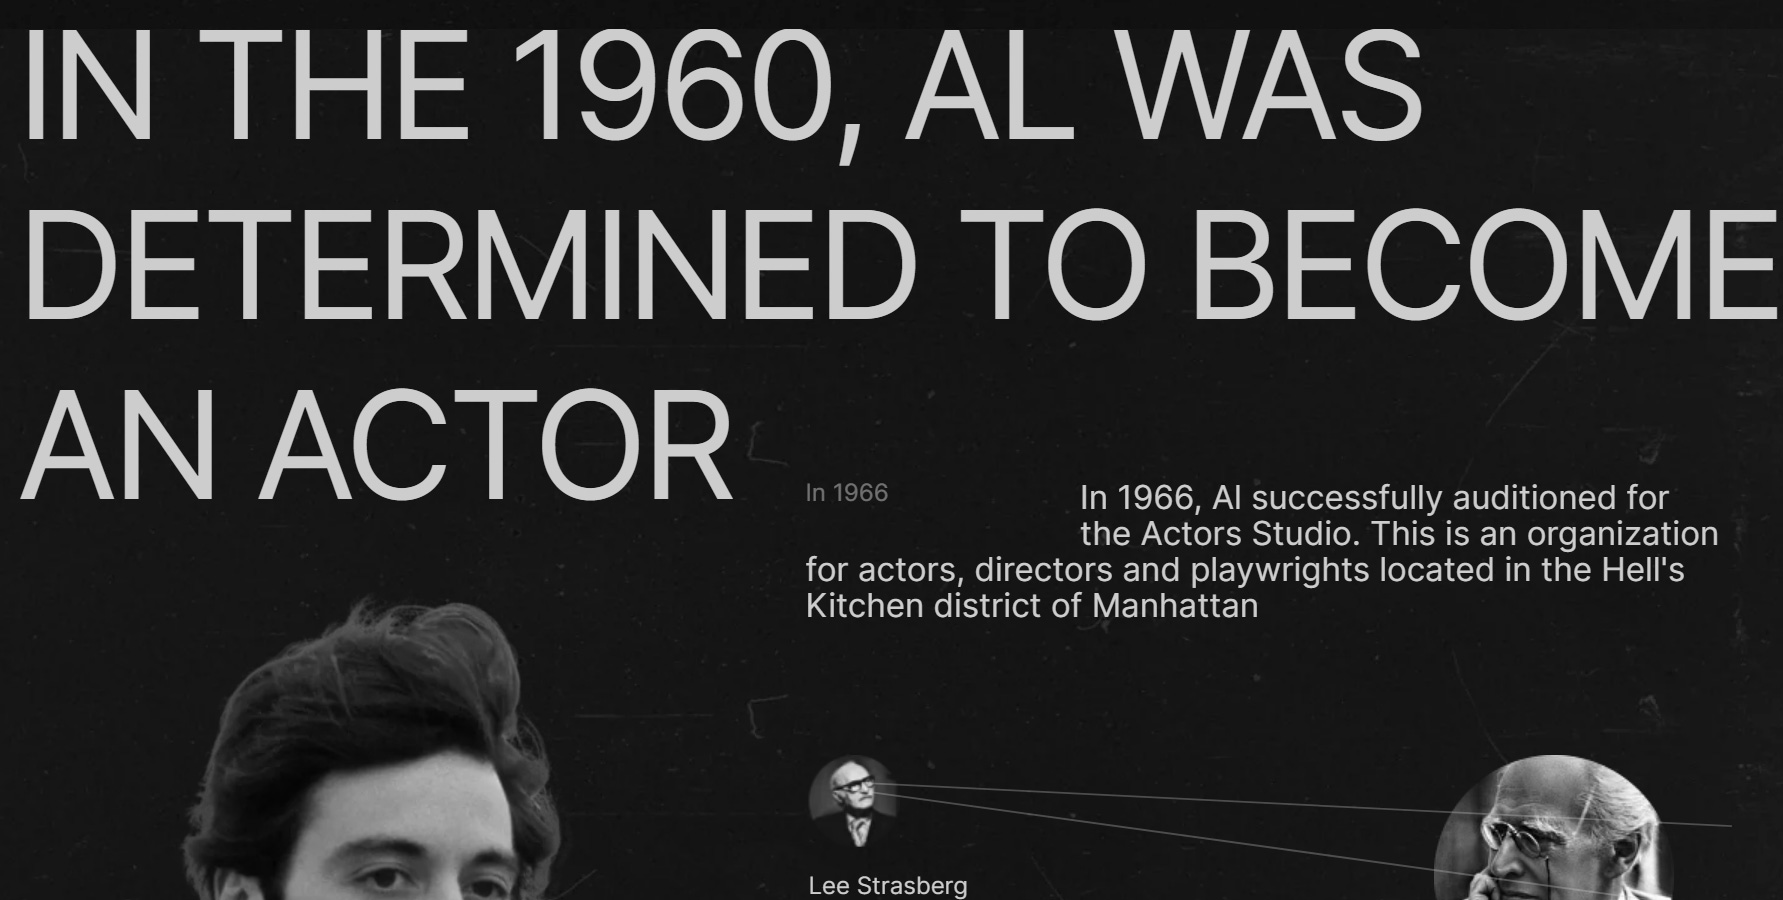 Longread on the biography of Al Pacino - Website of the Day